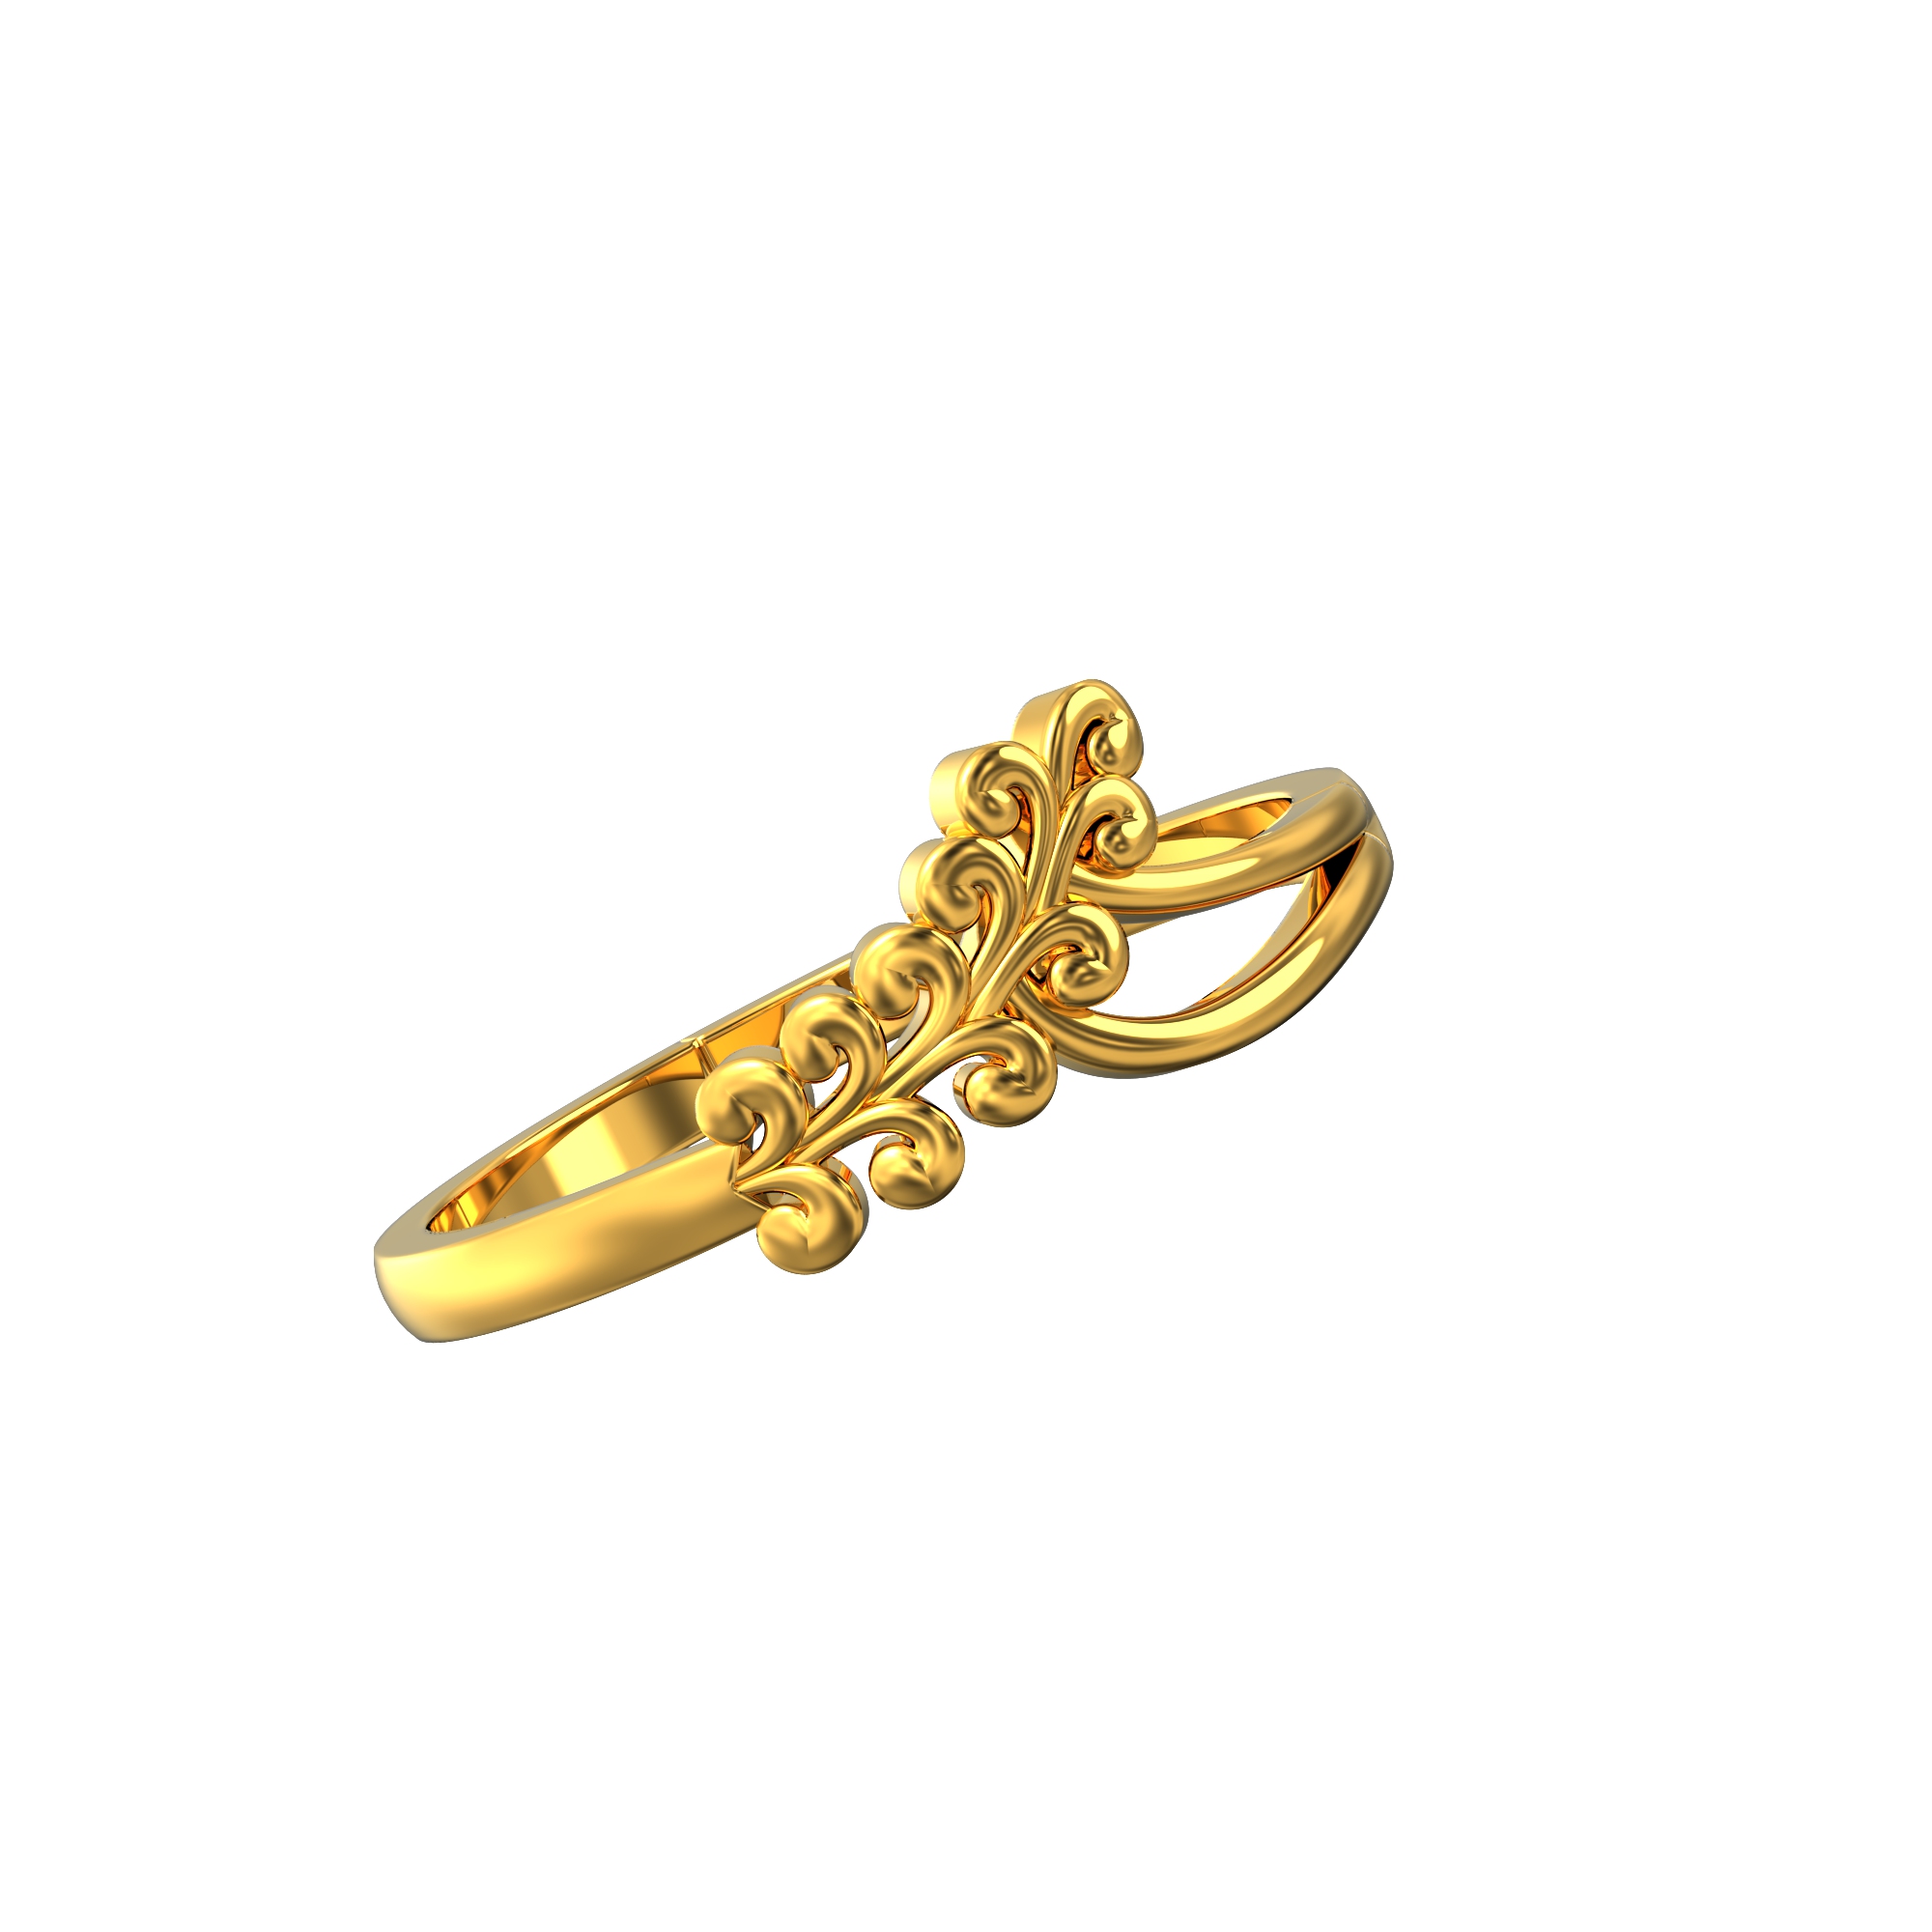 Latest gold ring designs for women with price and weight| Gold Engagement Ring  designs … | Gold engagement ring designs, Latest gold ring designs, Gold  ring designs